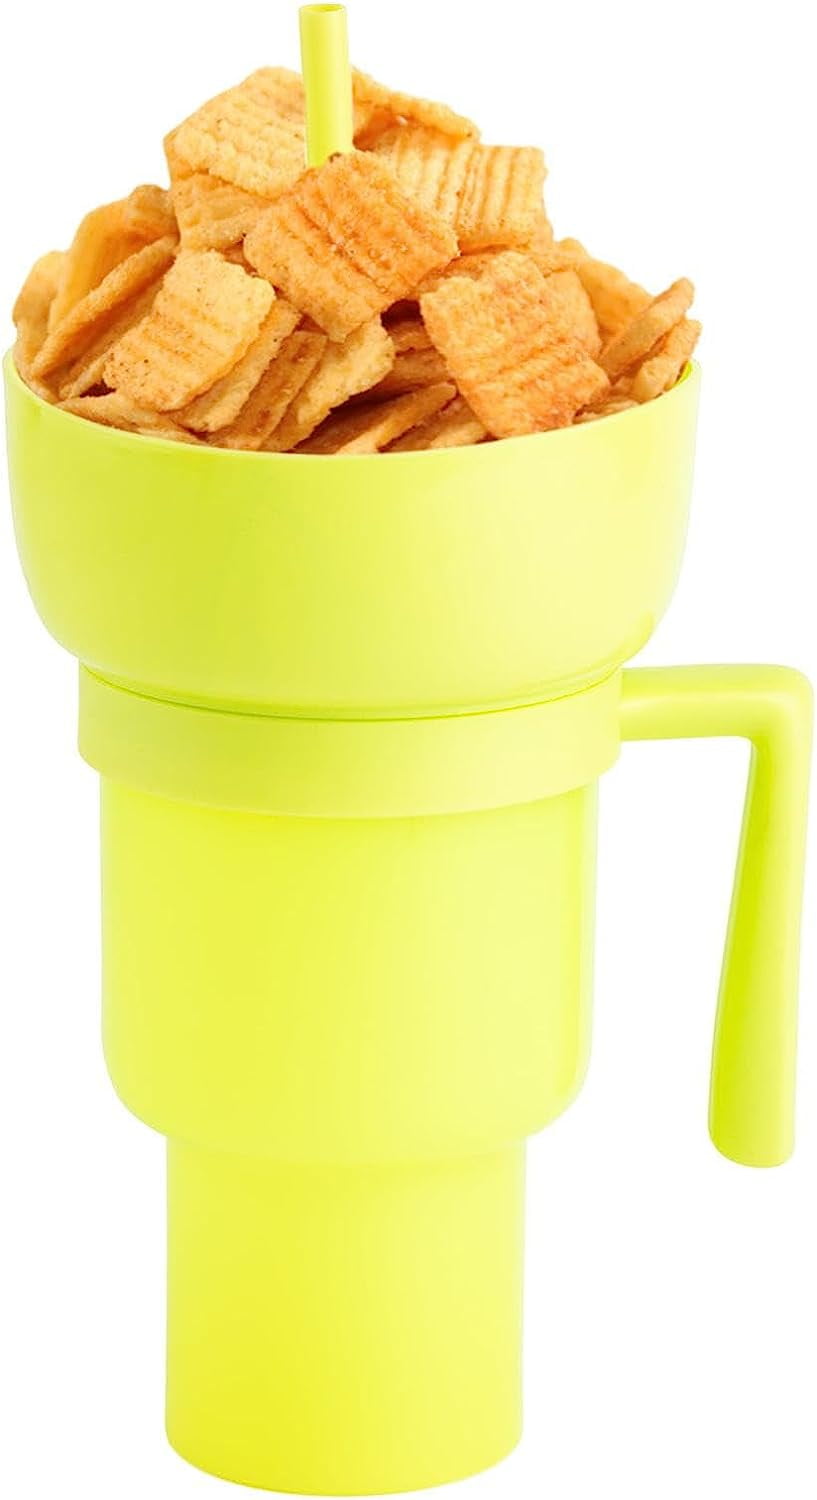 11 Best Snack Cups For Kids in 2018 - Snack Cups and Food Storage